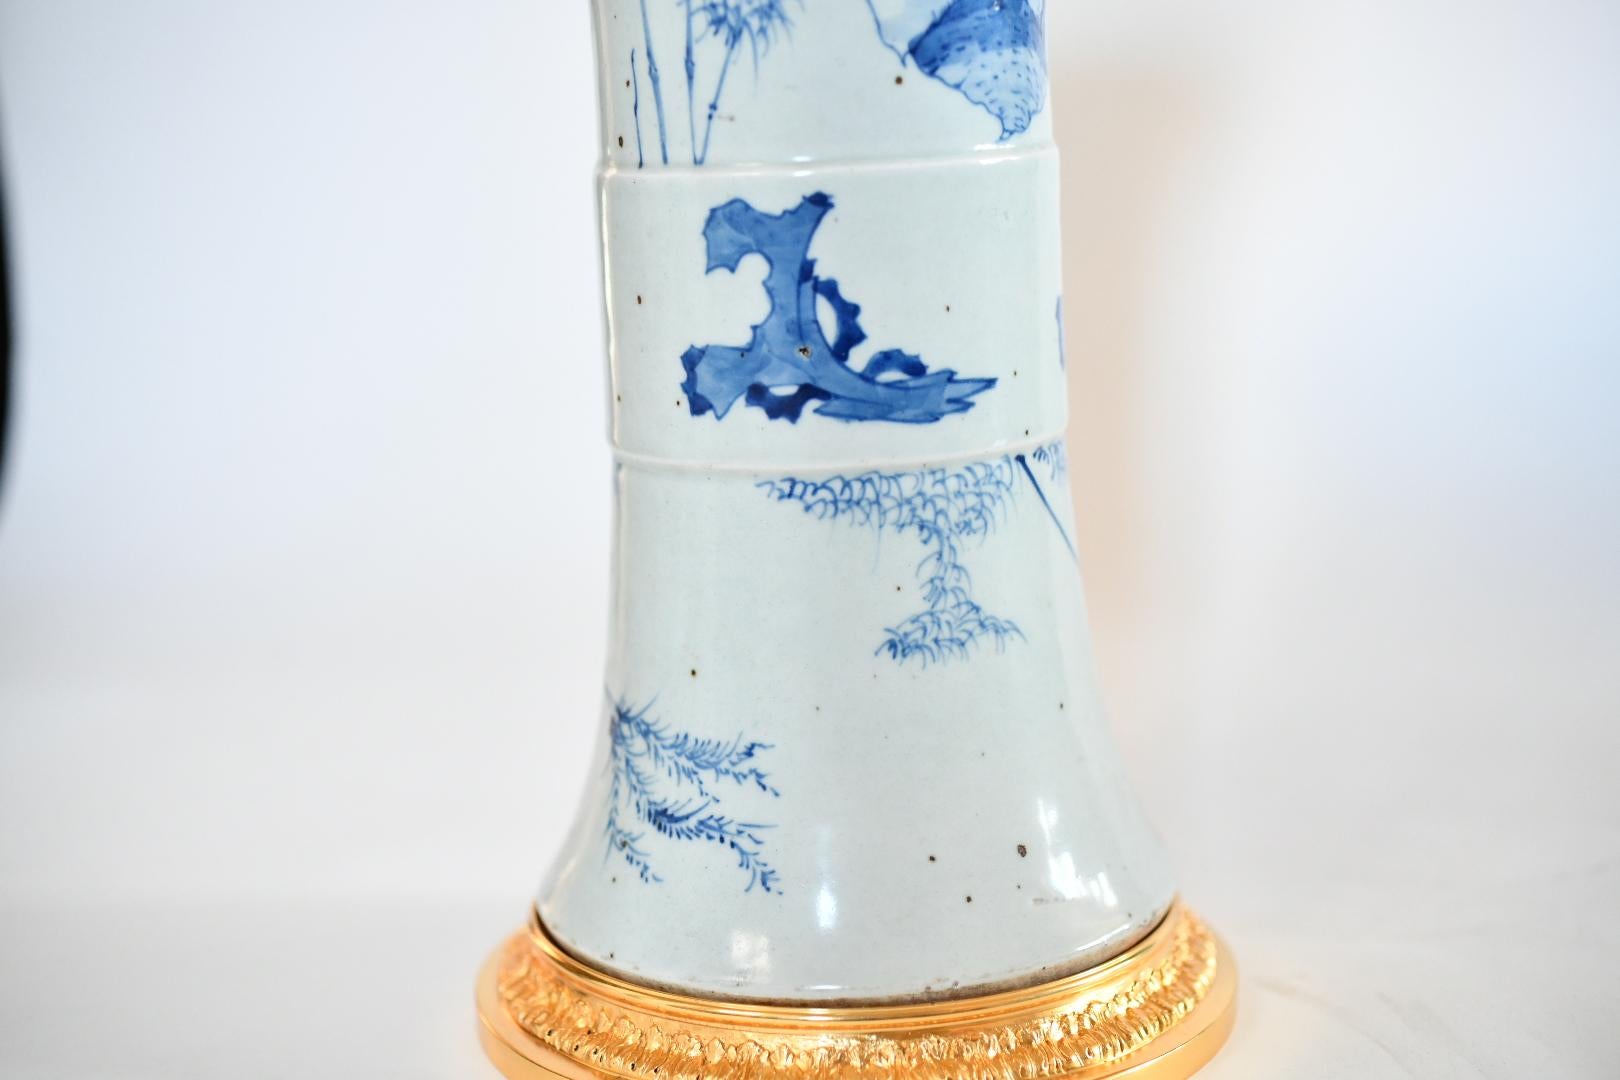 A pair of blue and white porcelain lamps, painted with mountain village scenes, and fine cast gilt brass bases
Each lamp installed two standard sockets
To the top of the porcelain: 14 in/H
lamp shade not included.